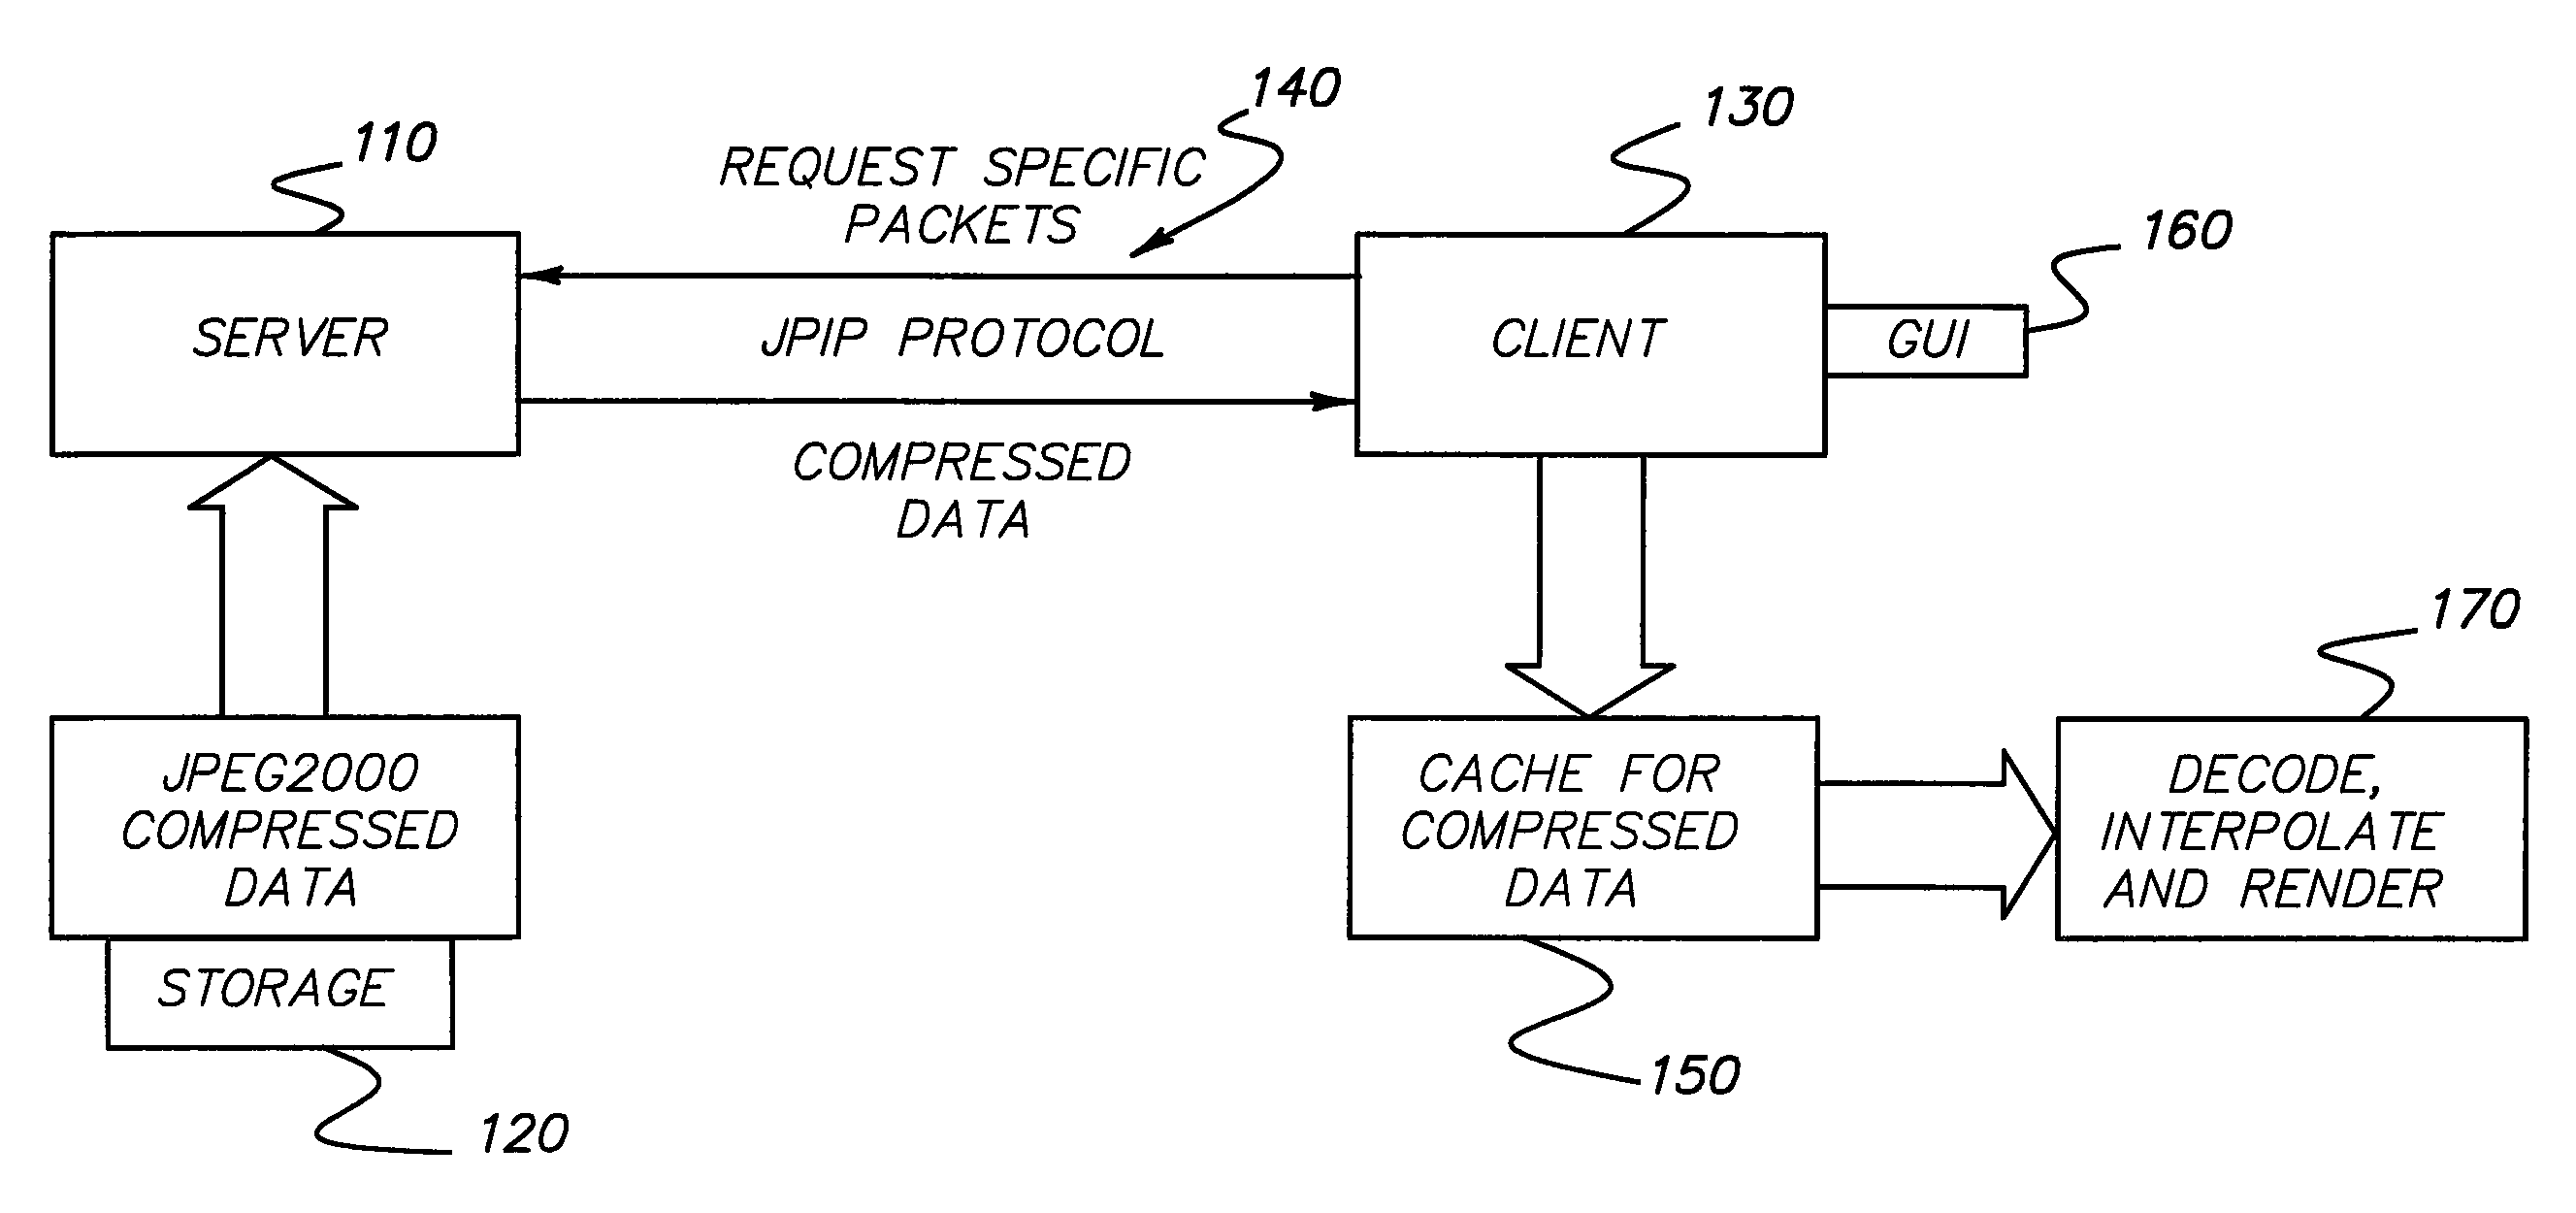 System and method for rendering an oblique slice through volumetric data accessed via a client-server architecture